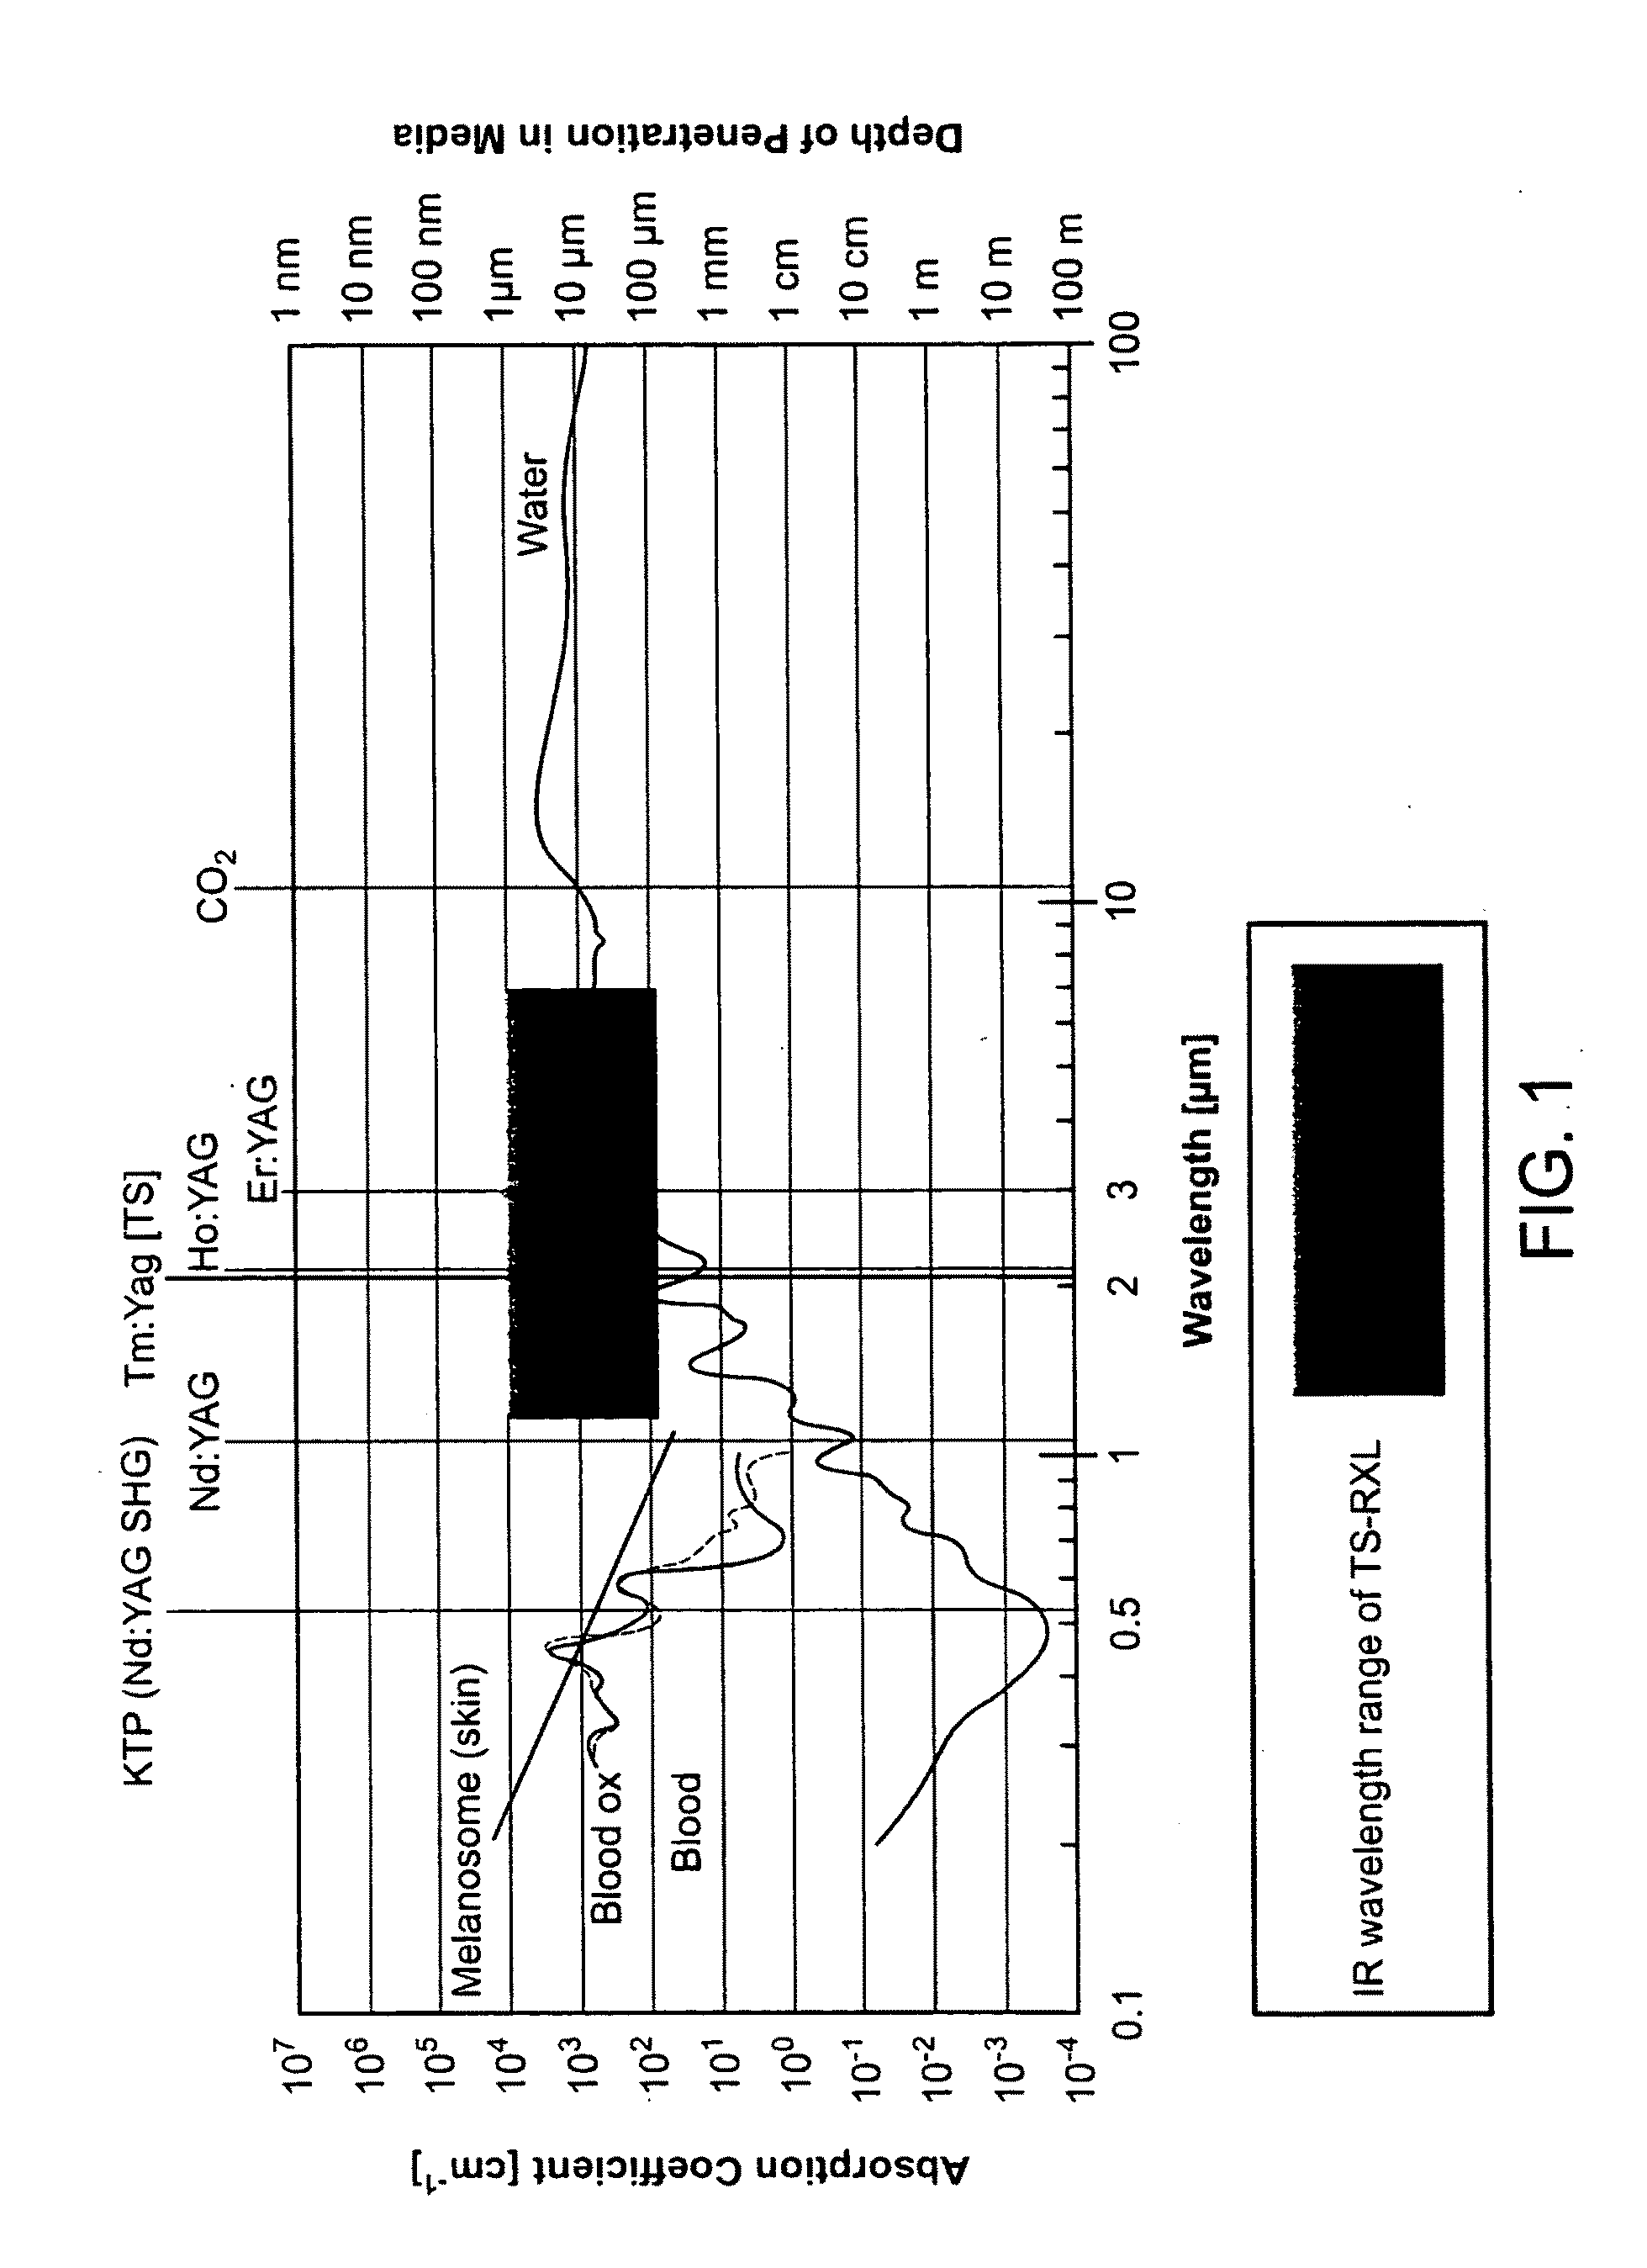 Method and apparatus for treatment of ocular tissue using combined modalities